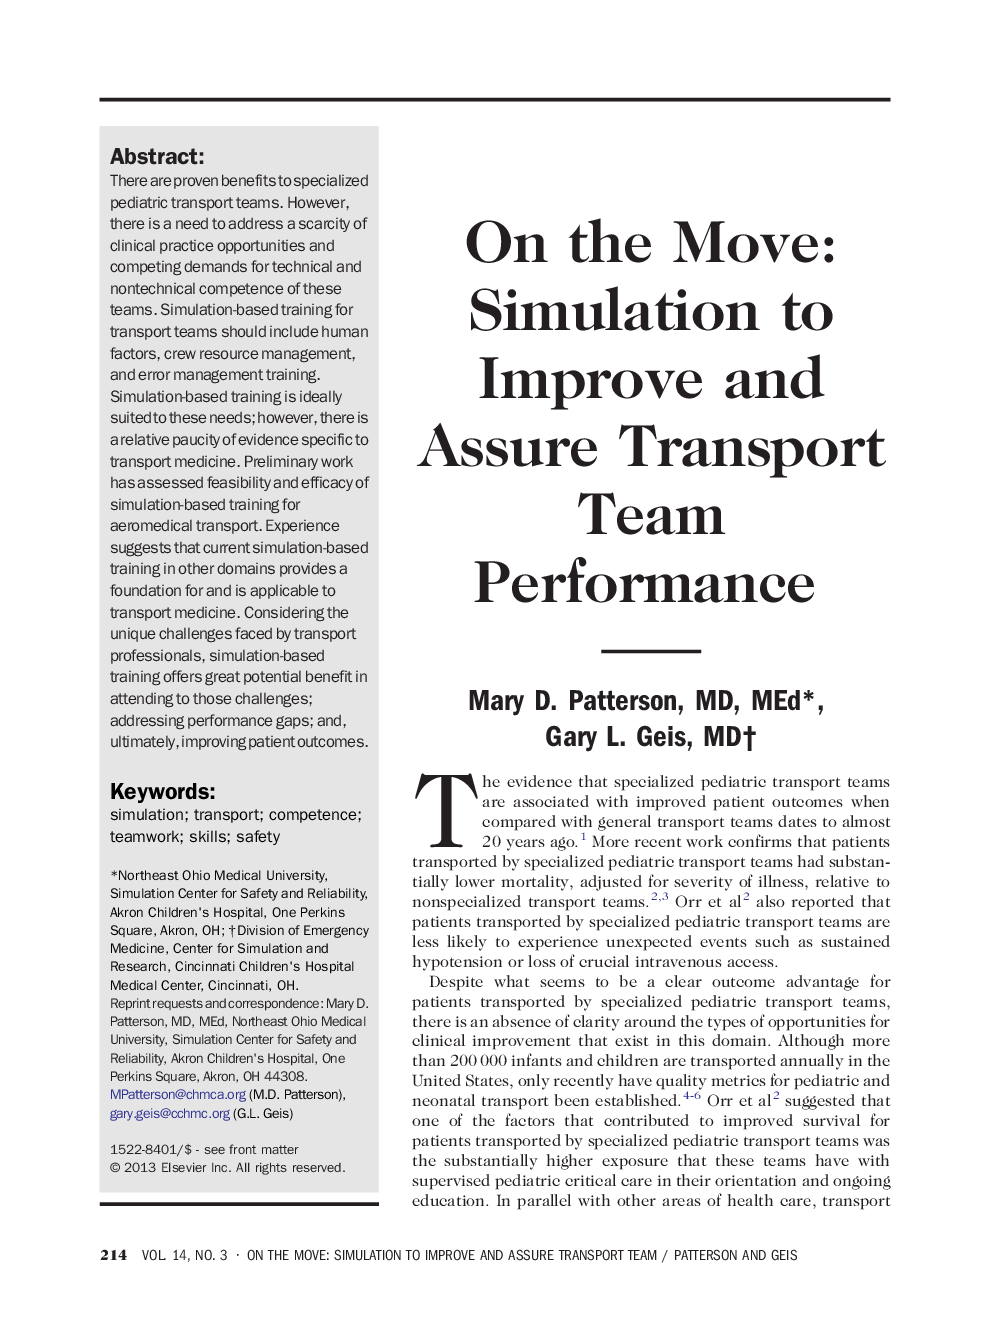 On the Move: Simulation to Improve and Assure Transport Team Performance 